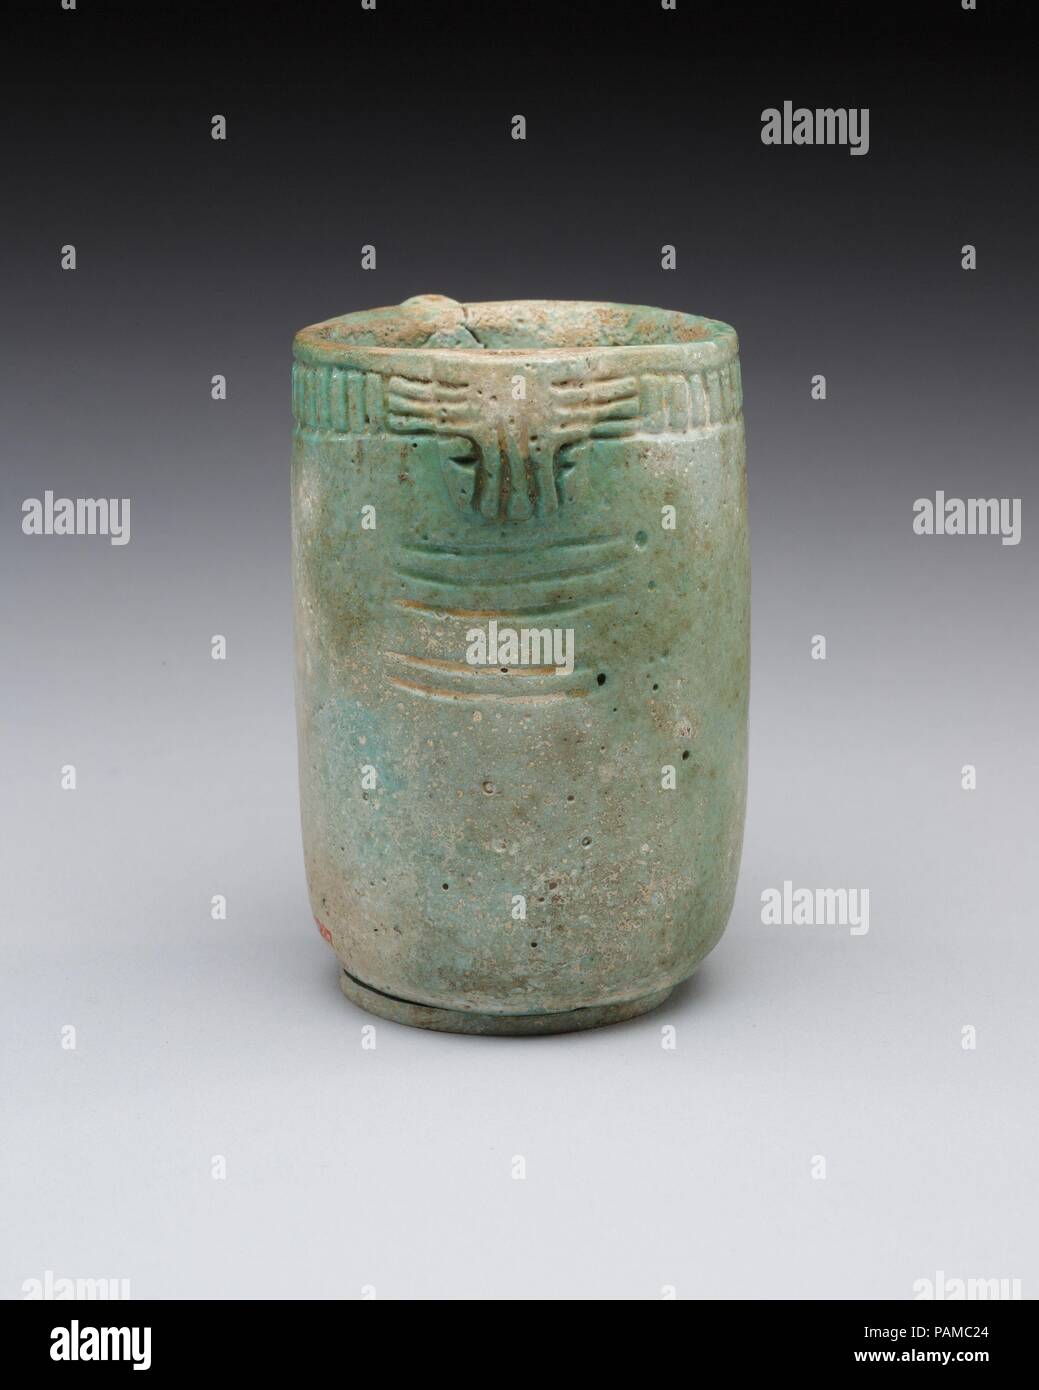 Jar with decorated rim, swivel, and knob. Dimensions: h. 7.5 cm (2 15/16 in.); diam. 5.5 cm (2 3/16 in.). Date: 664-30 B.C..  The color of this cylindrical vessel suggests a Late Period or Ptolemaic Period date. In a thickening on one side of the vessel's lip there is a hole for a swivel for the now missing lid. When meant to remain closed, string would have secured a knob on the lid to a knob protruding from the side of the vessel opposite the swivel. Museum: Metropolitan Museum of Art, New York, USA. Stock Photo